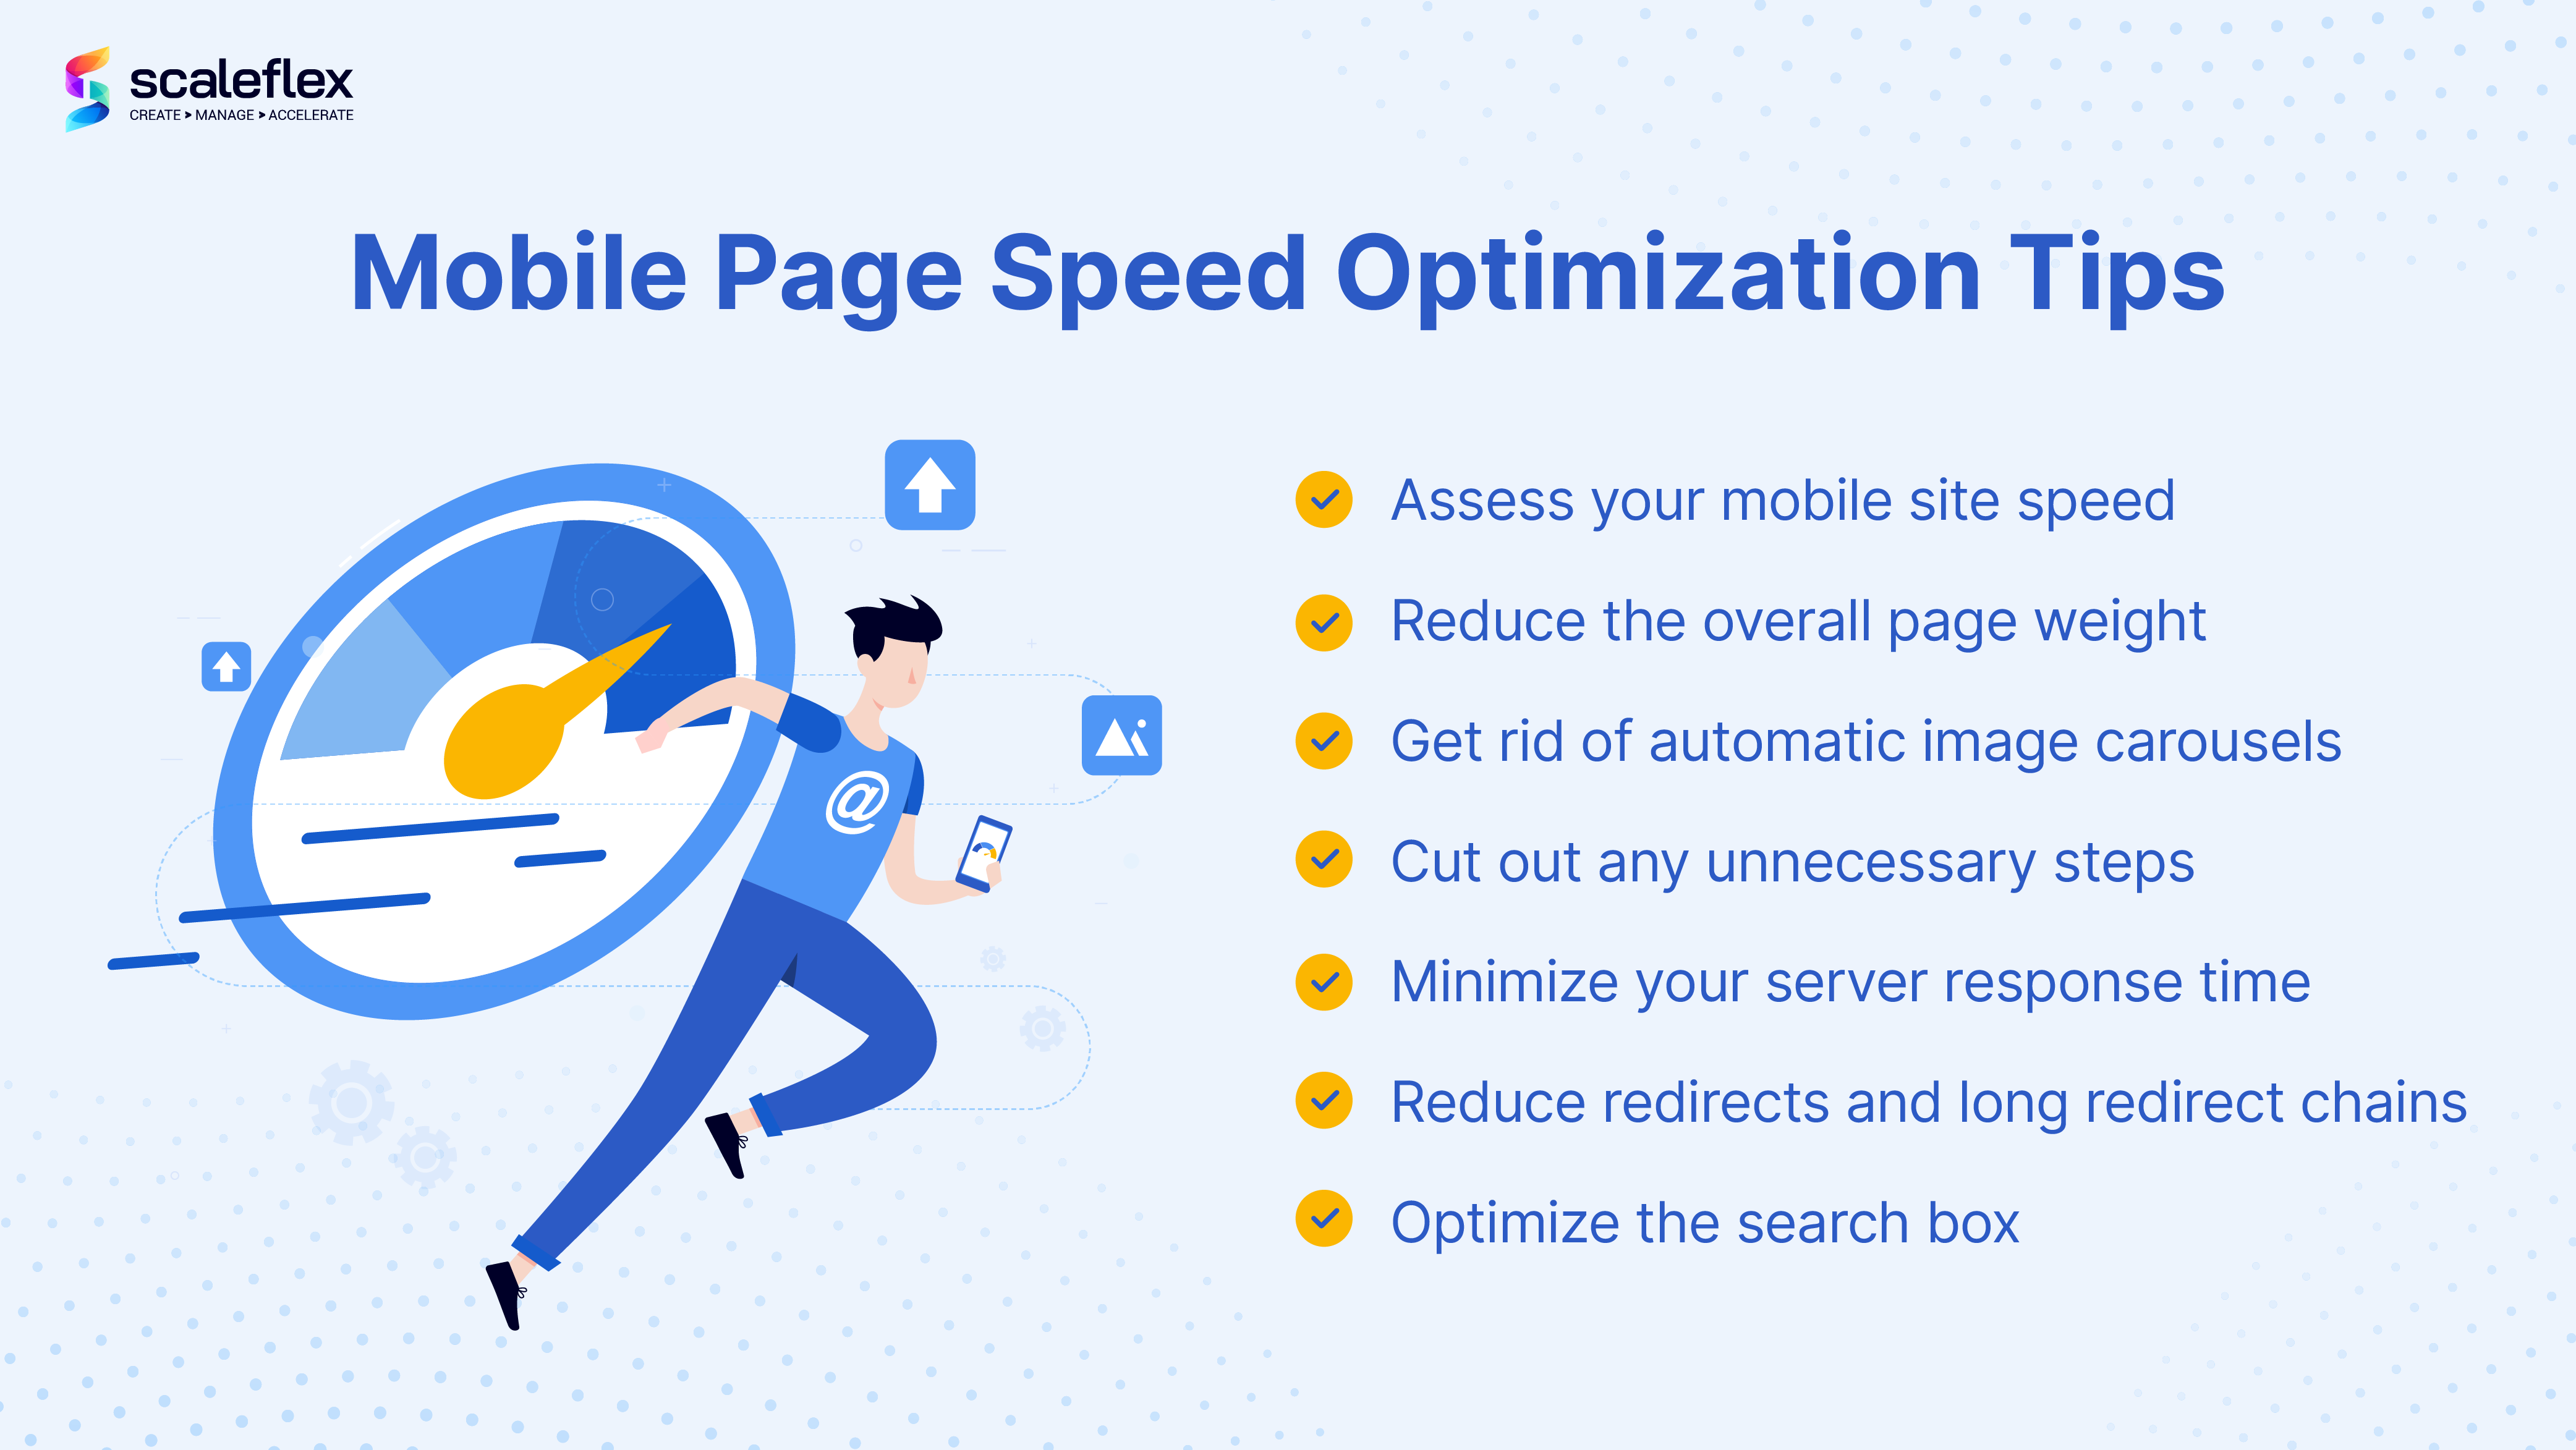 How to Make Your Mobile Site Load Faster - 15 Ways to Improve Mobile Speed  - Delante Blog